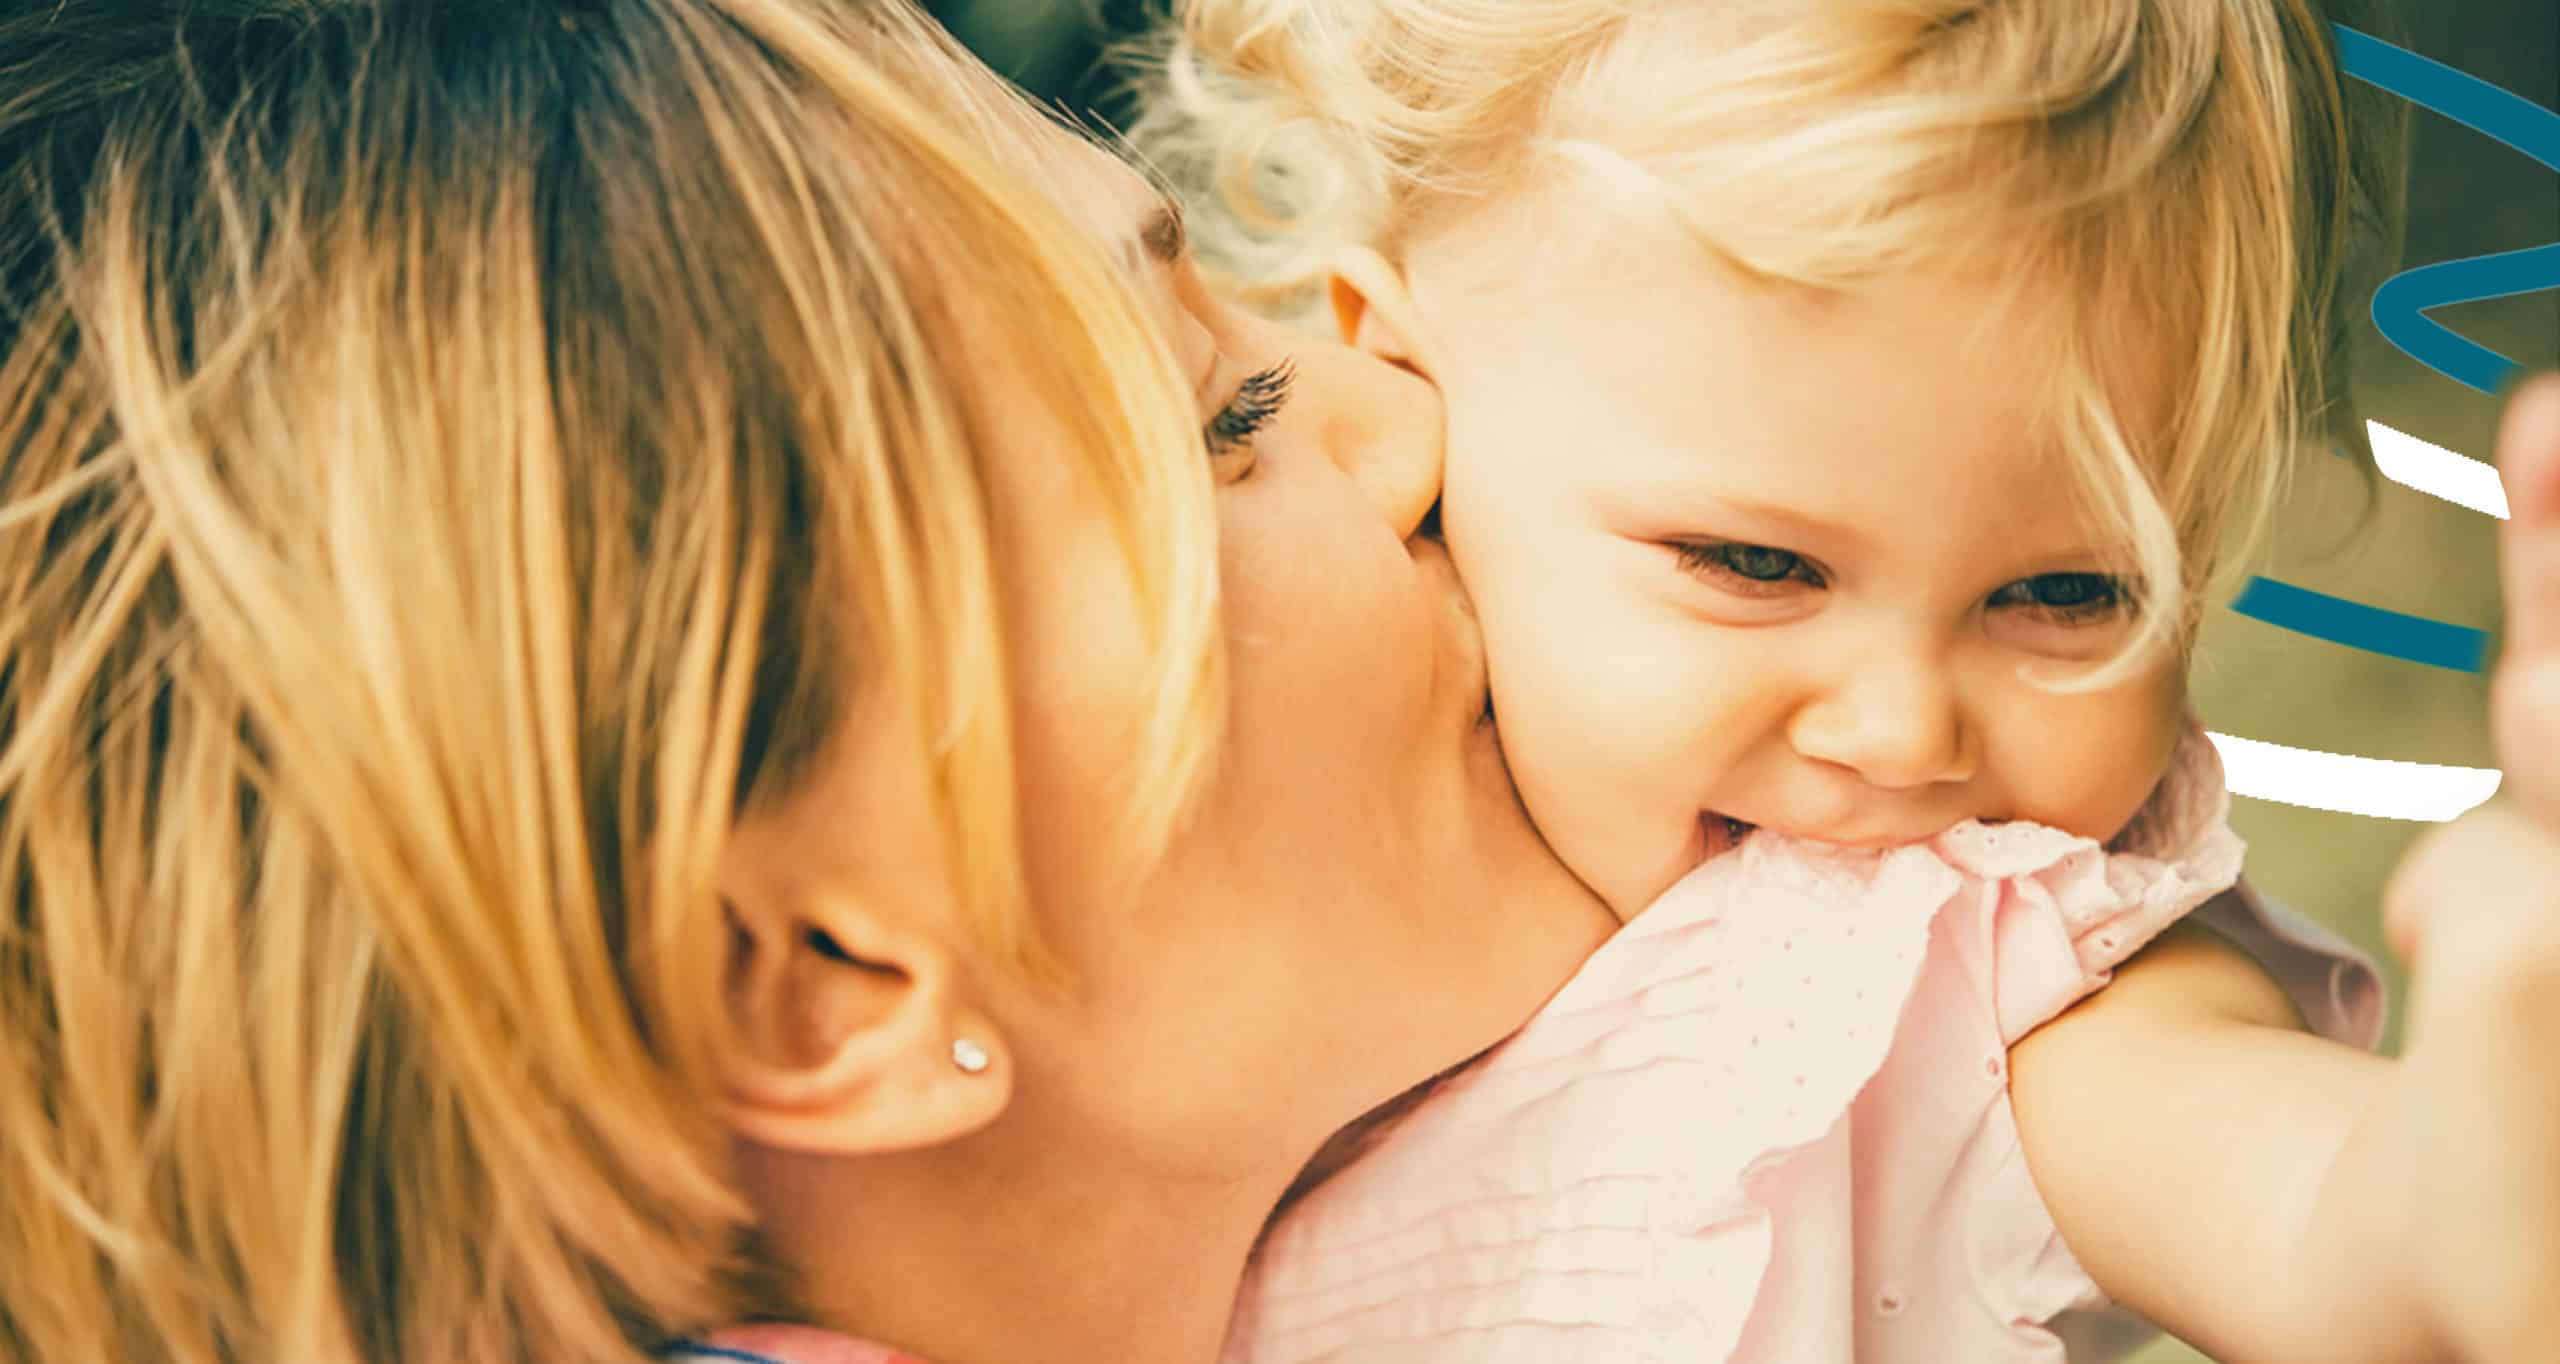 Mother's Day: Five ways to care for mom's physical, mental health 